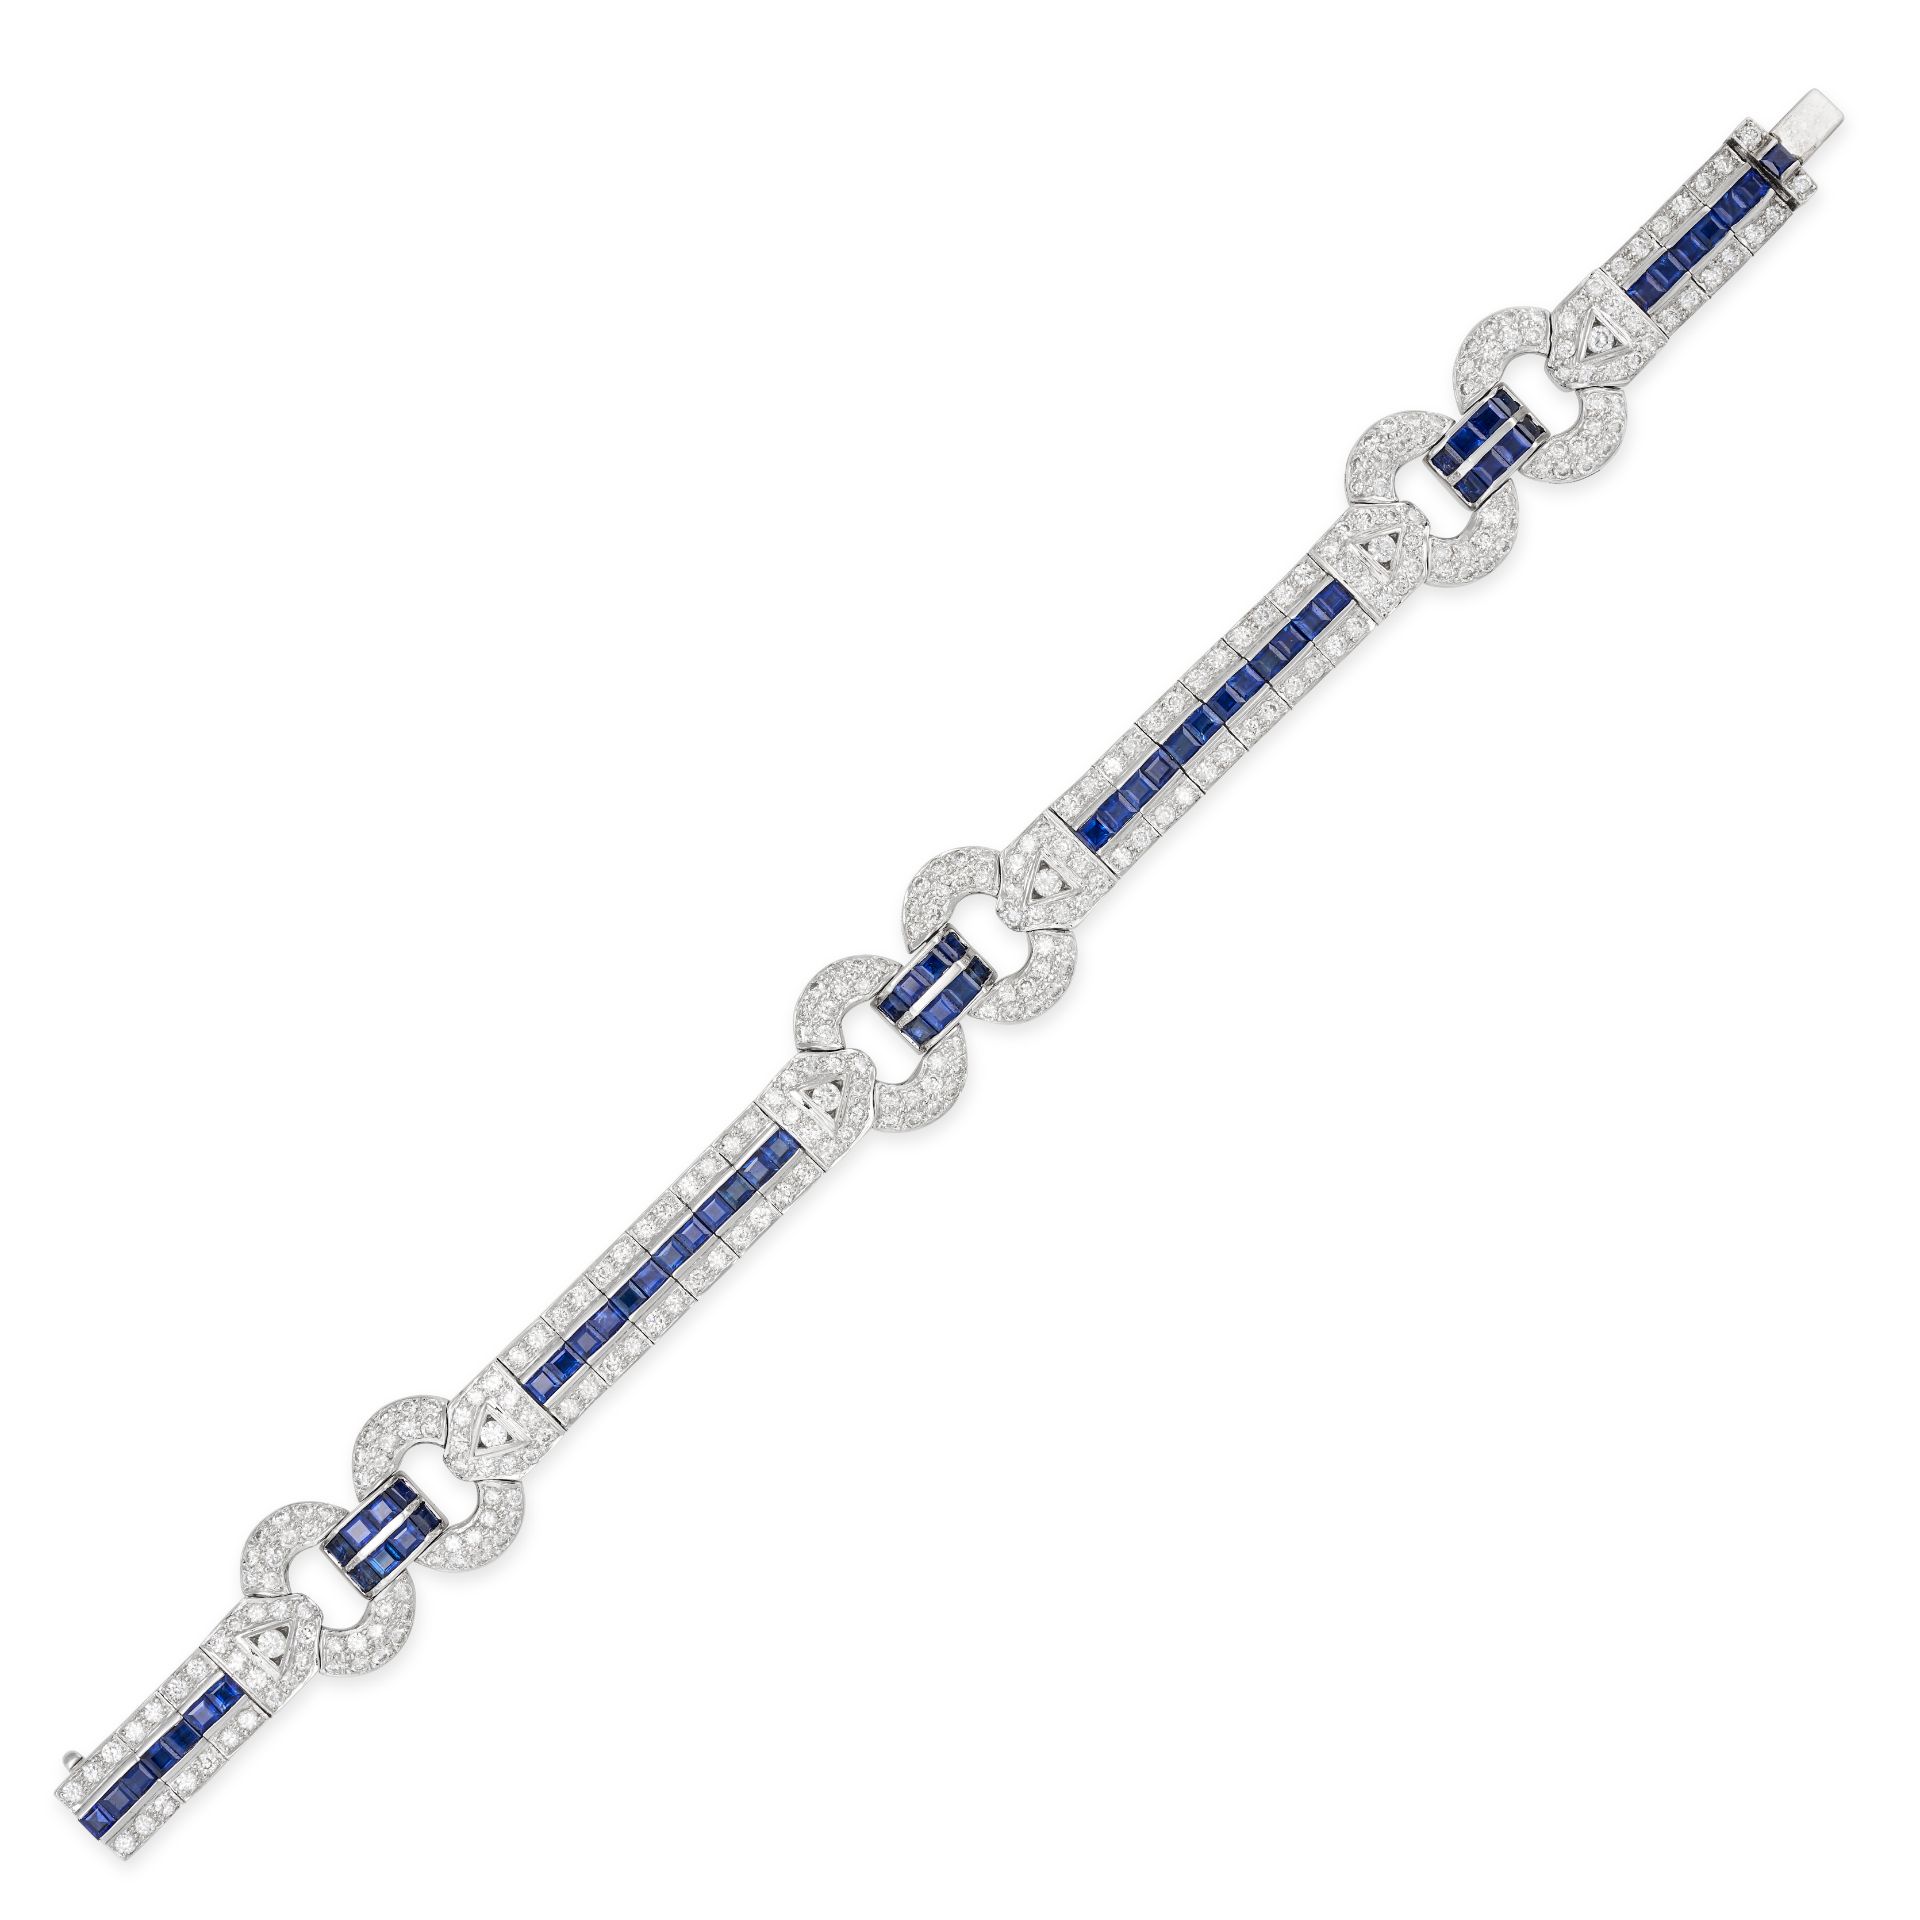 A SAPPHIRE AND DIAMOND BRACELET in 18ct white gold, set throughout with round brilliant cut diamo...